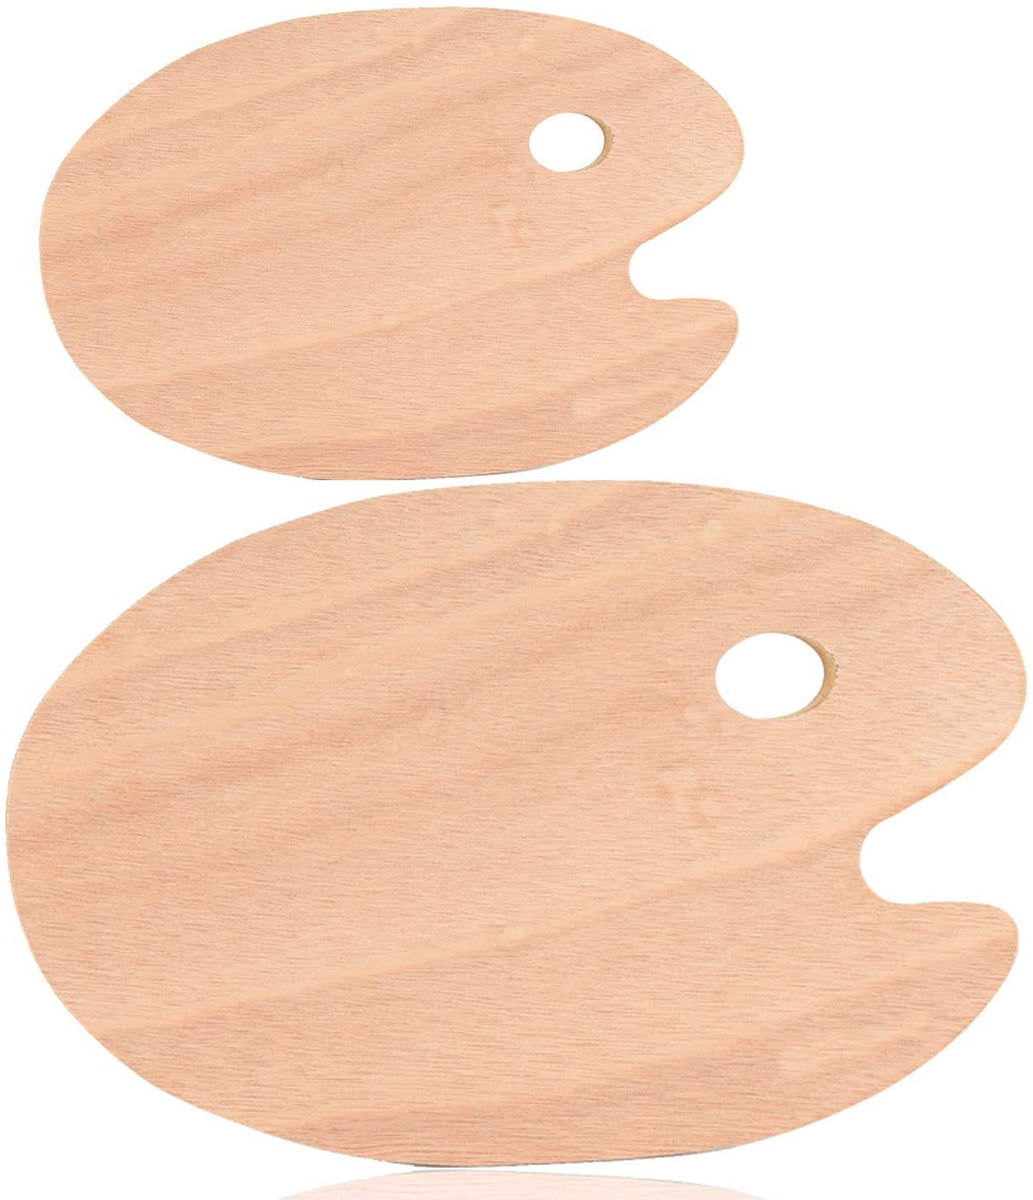 AOOKMIYA Wooden Palette Oval Square Multi-specification Oil Paint Pale